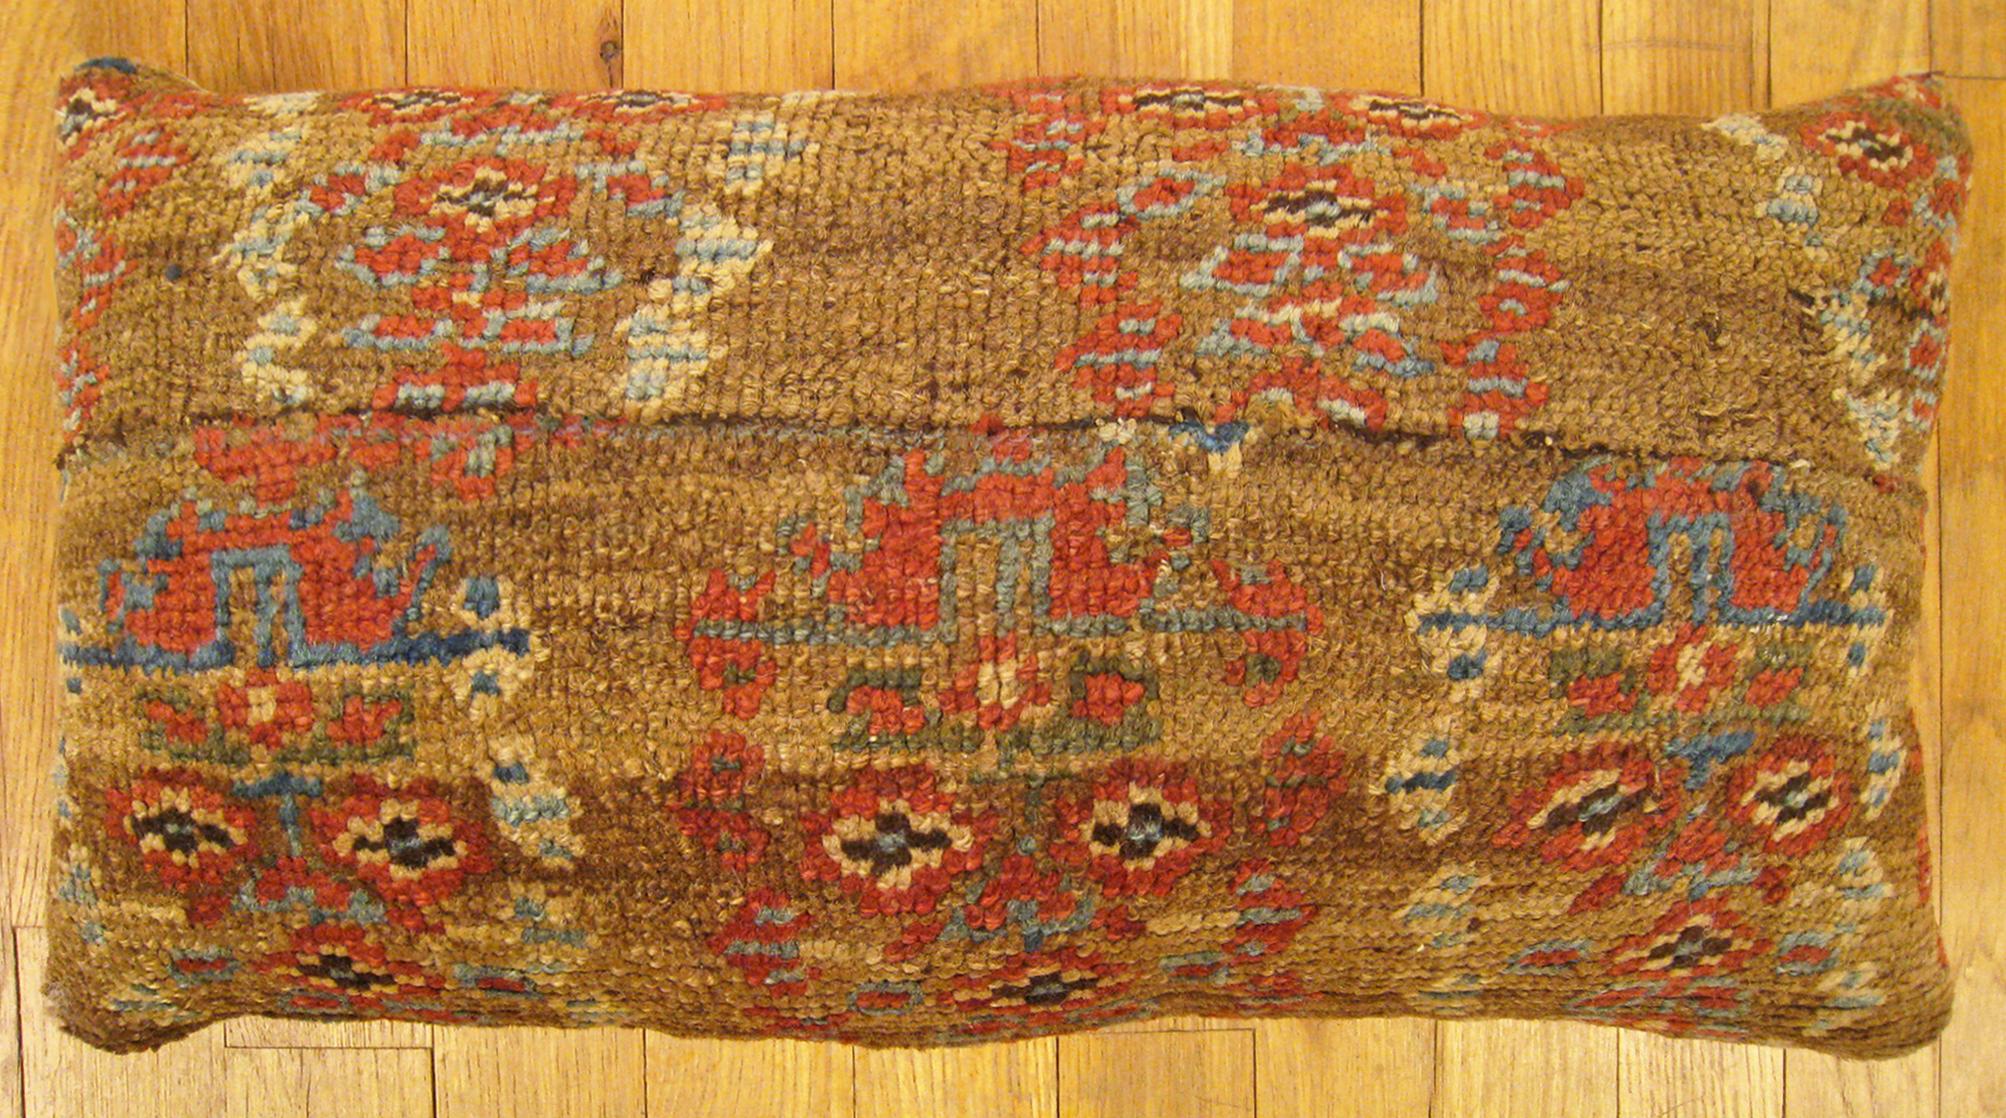 Antique Persian Bakshaish Carpet Pillow; size 1'9” x 1'0”.

An antique decorative pillow with floral elements in a camel central field, size 1'9” x 1'0”. This lovely decorative pillow features an antique fabric of a Persian Bakshaish carpet on front